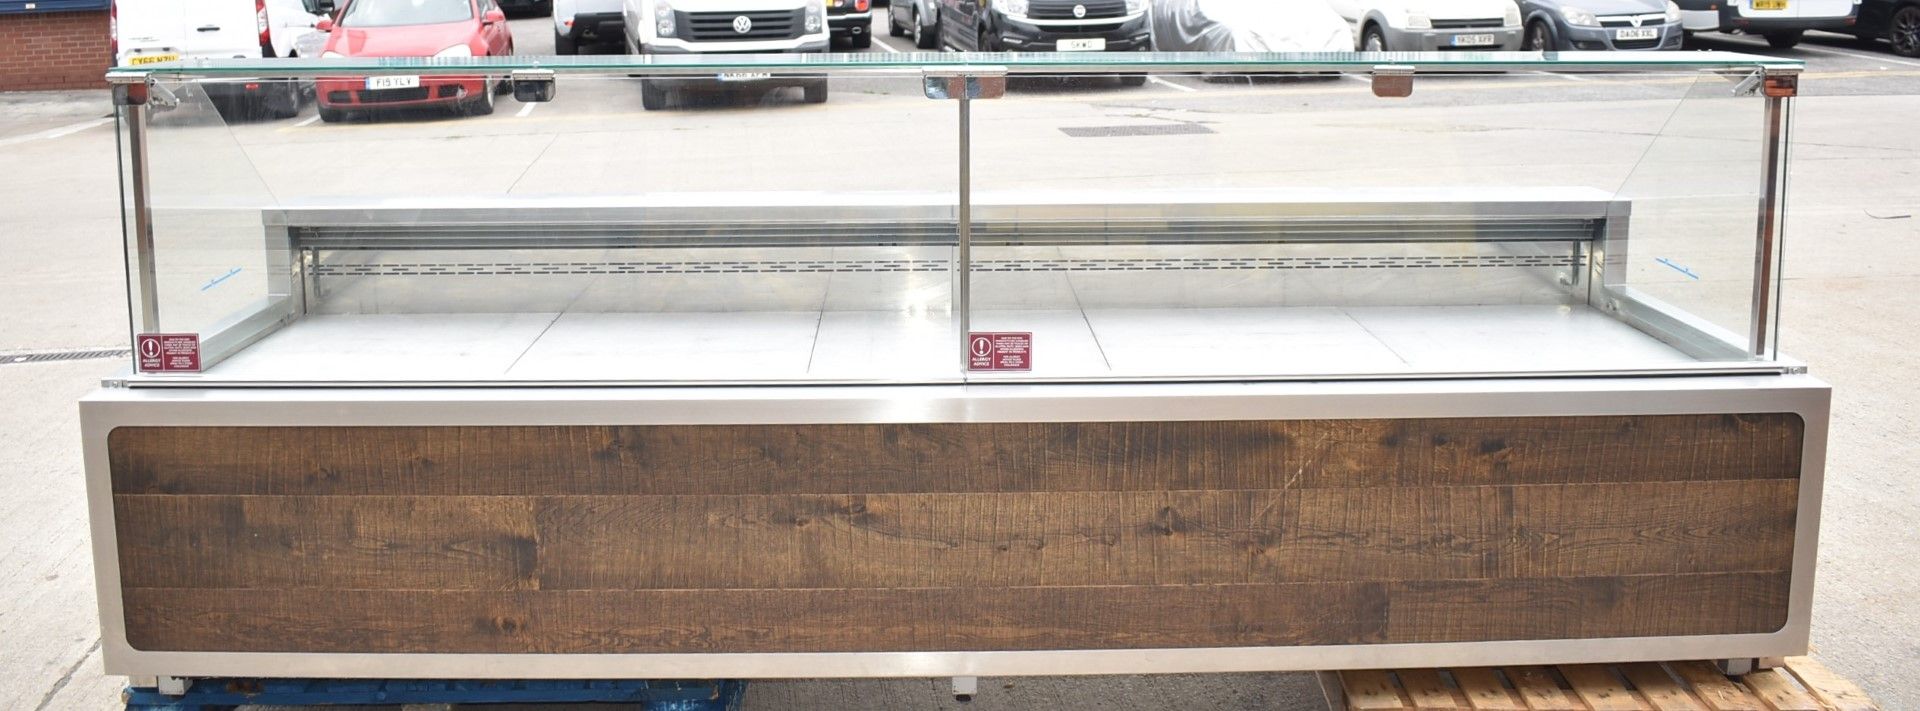 1 x Eurocryor Bistro Refrigerated Retail Counter - Suitable For Takeaways, Butchers, Deli, Cake - Image 2 of 28